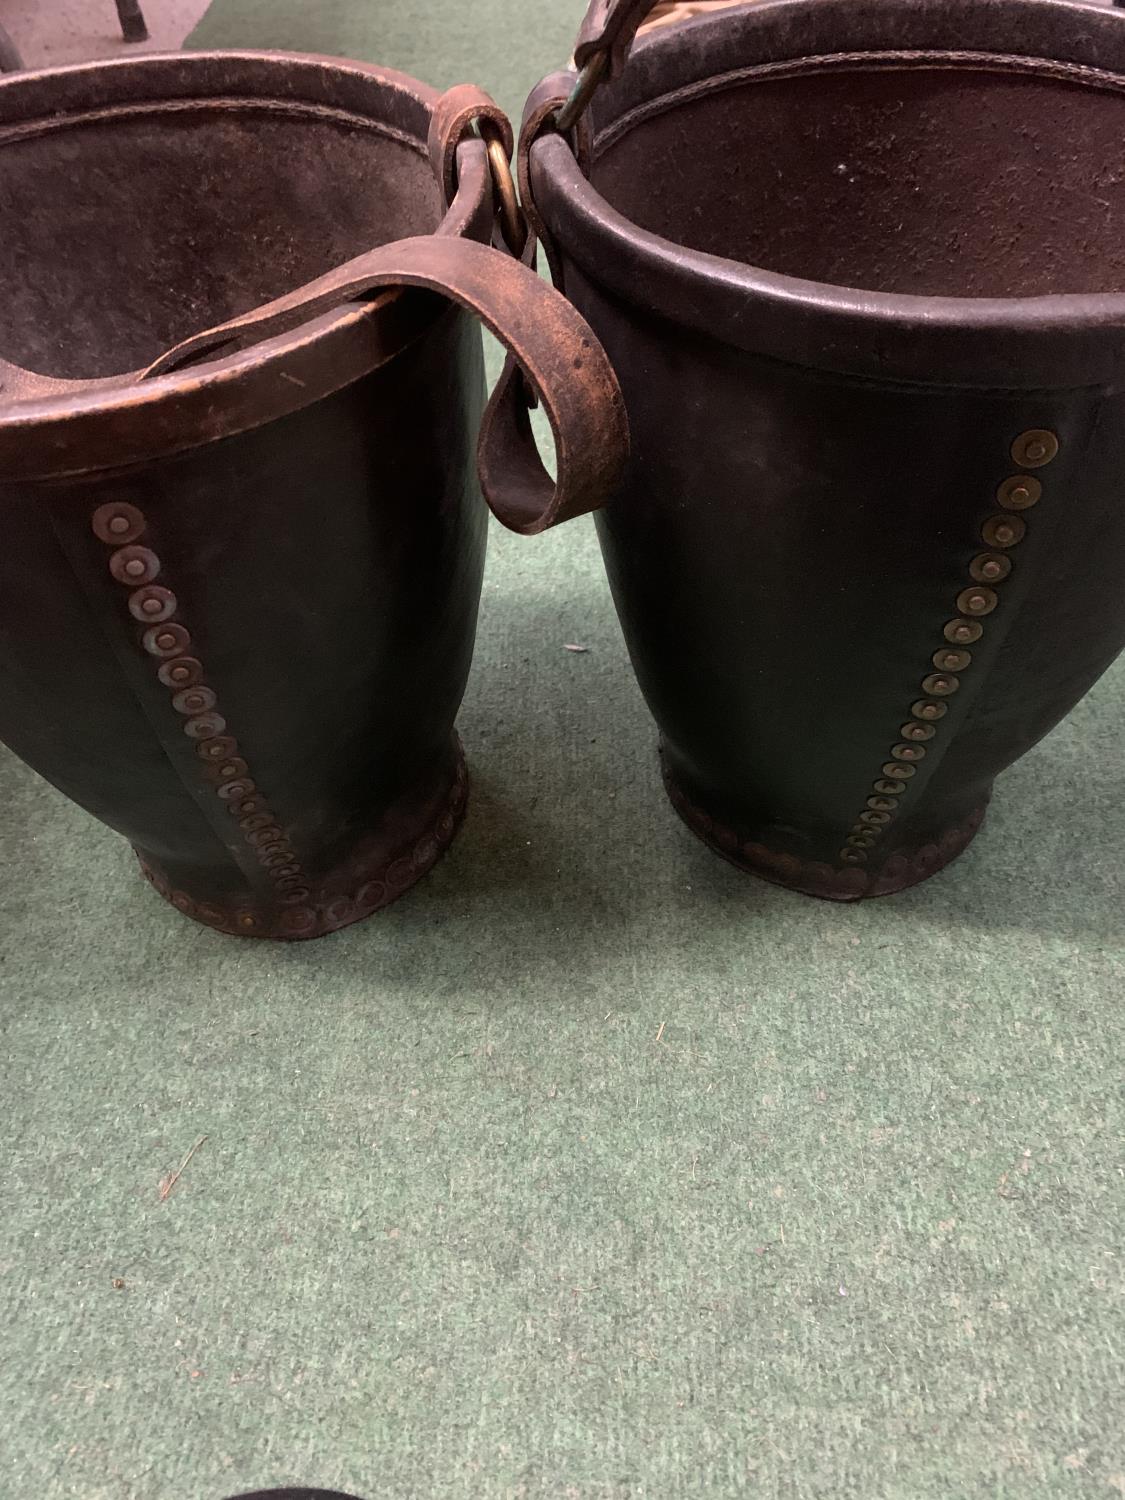 A PAIR OF VINTAGE LEATHER HORSE BUCKETS WITH STRAPS - Image 3 of 3